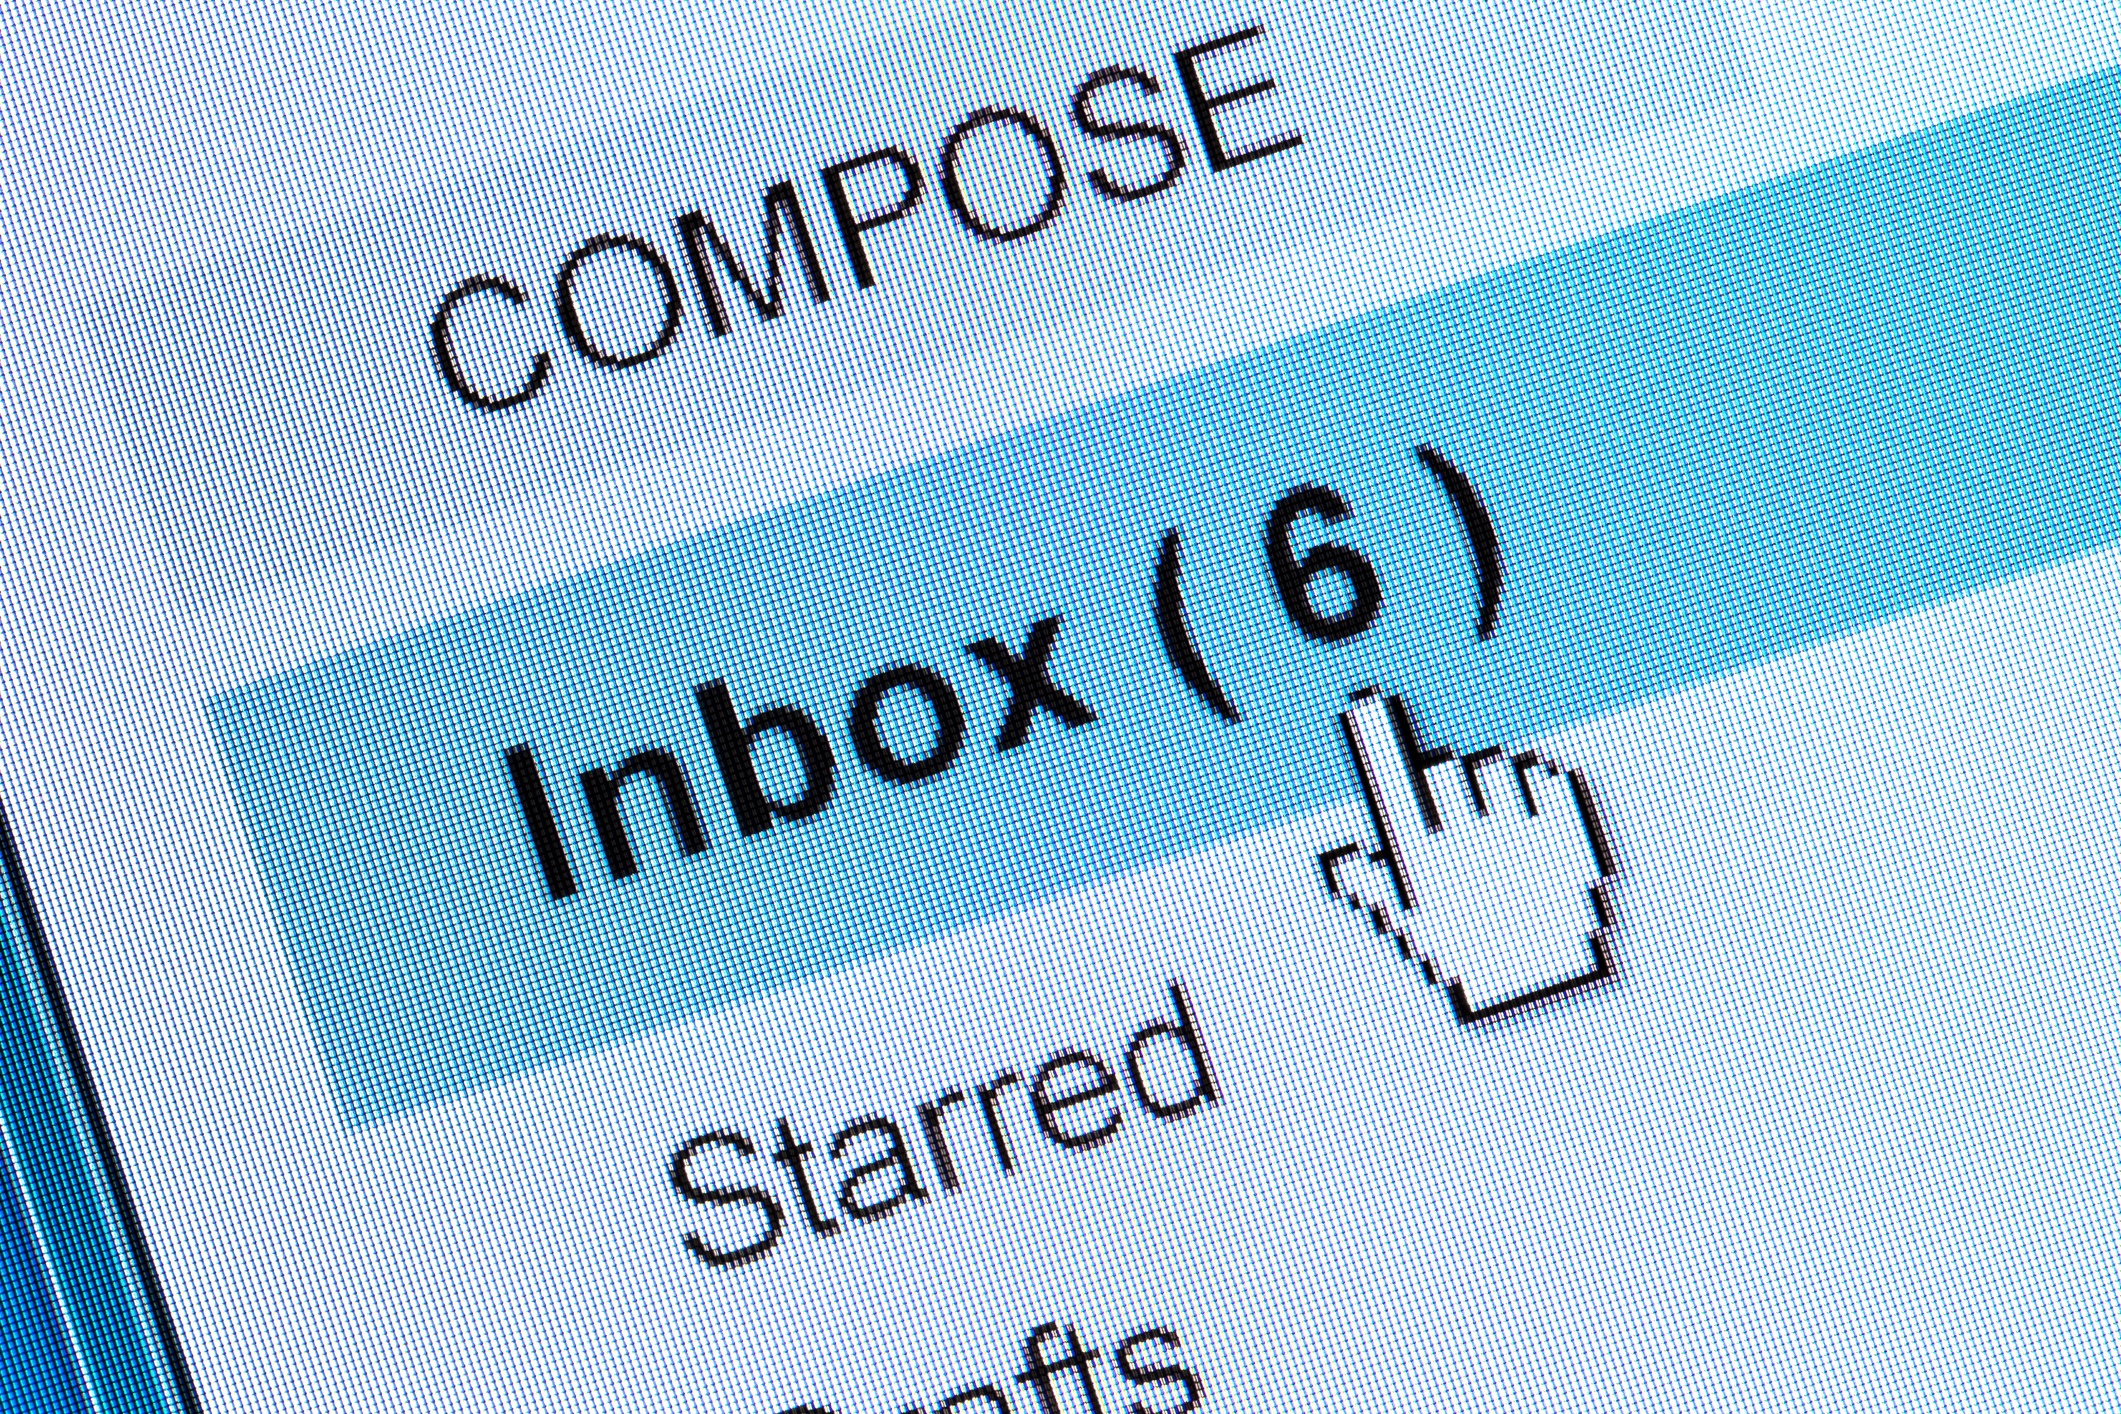 Email Marketing Should be Much More than a Newsletter | Hyperweb Communications